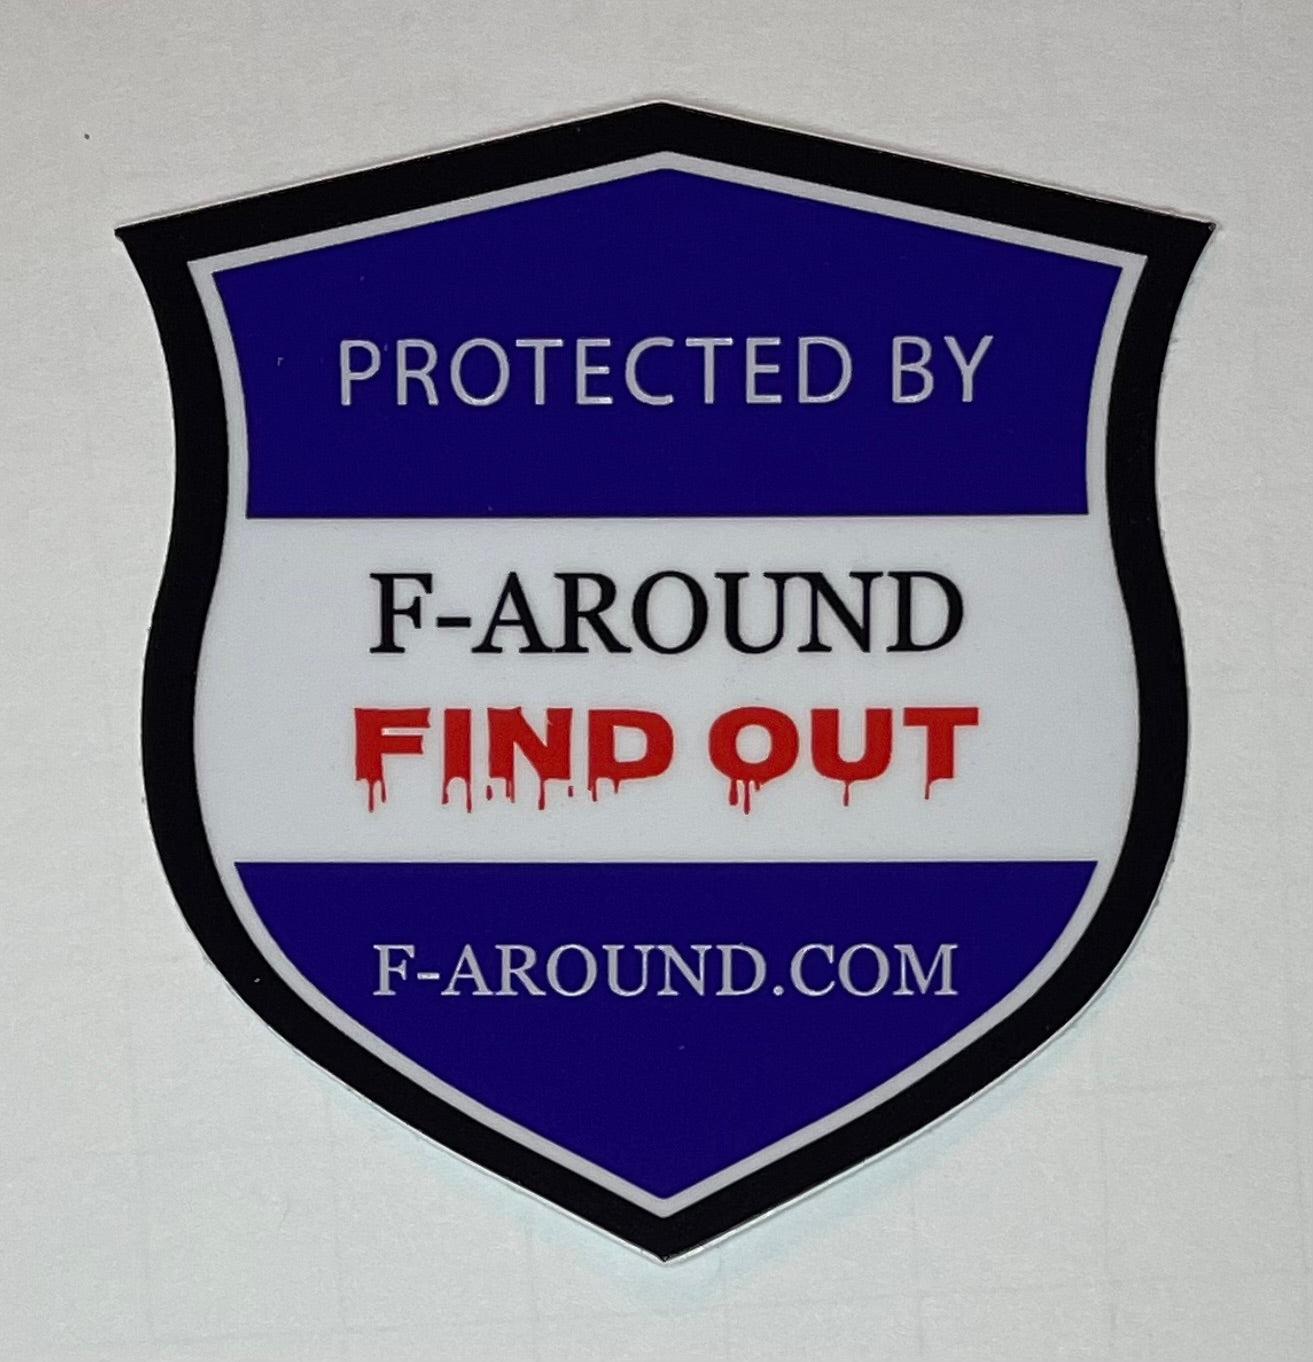 F-Around & Find Out Security Sign